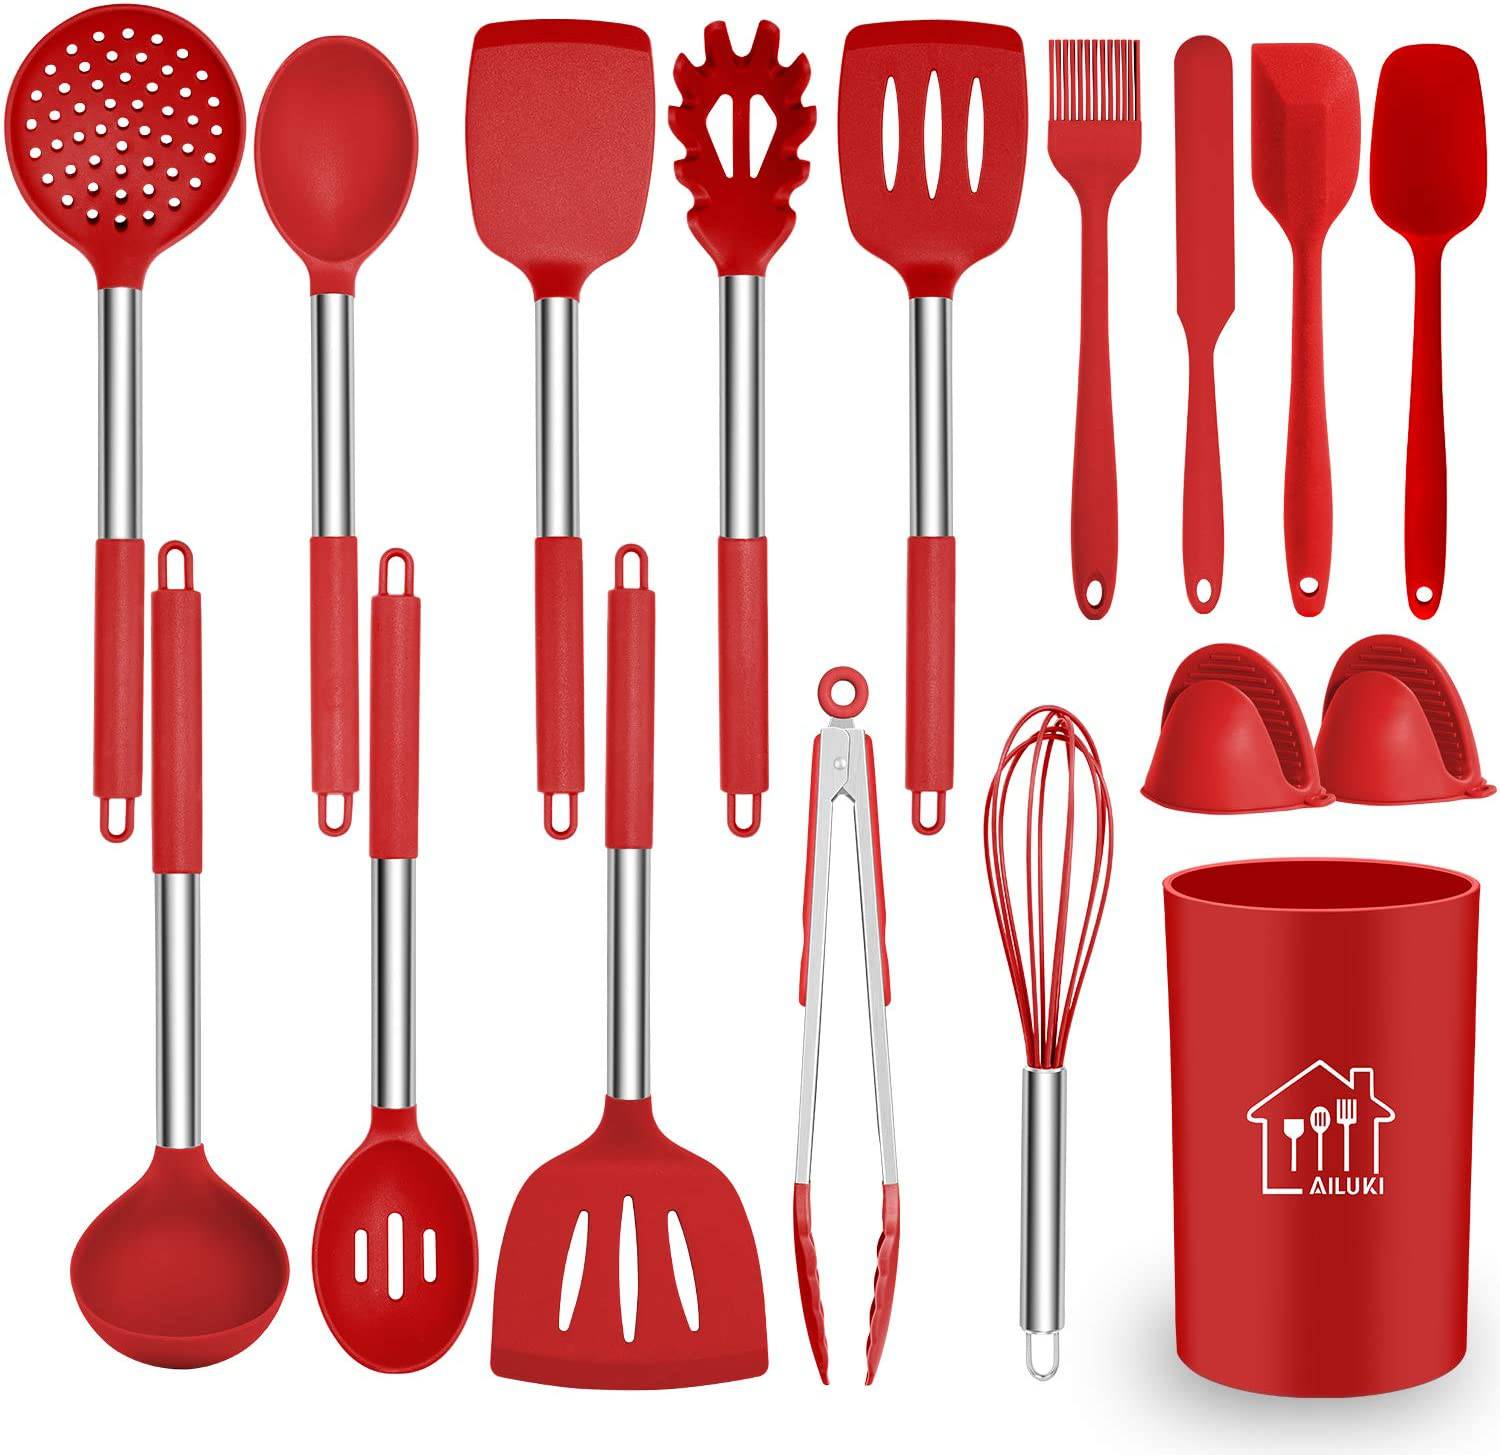 https://babylovesupplies.com.au/cdn/shop/products/babylove-supplies-silicone-cooking-utensil-set-ailuki-kitchen-utensils-14-pcs-cooking-utensils-23949533741207_1500x.jpg?v=1612859931